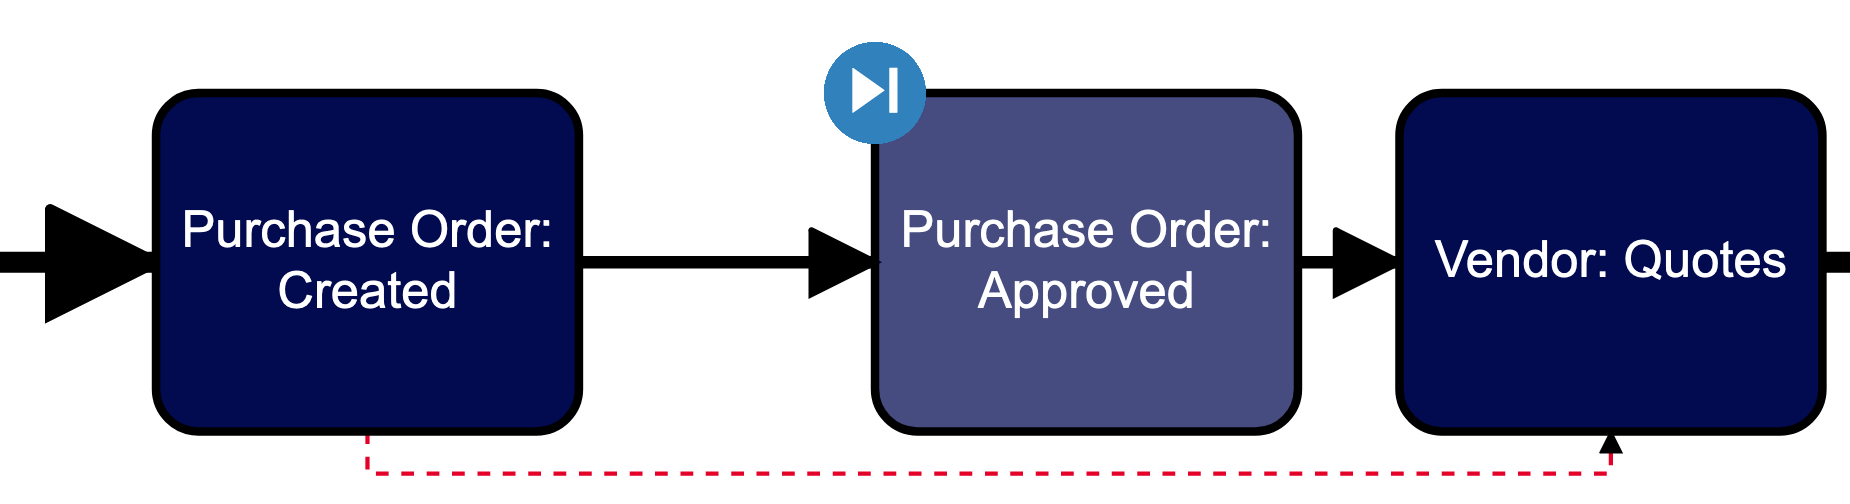 The target model shows a skipped Purchase Order: Approved activity